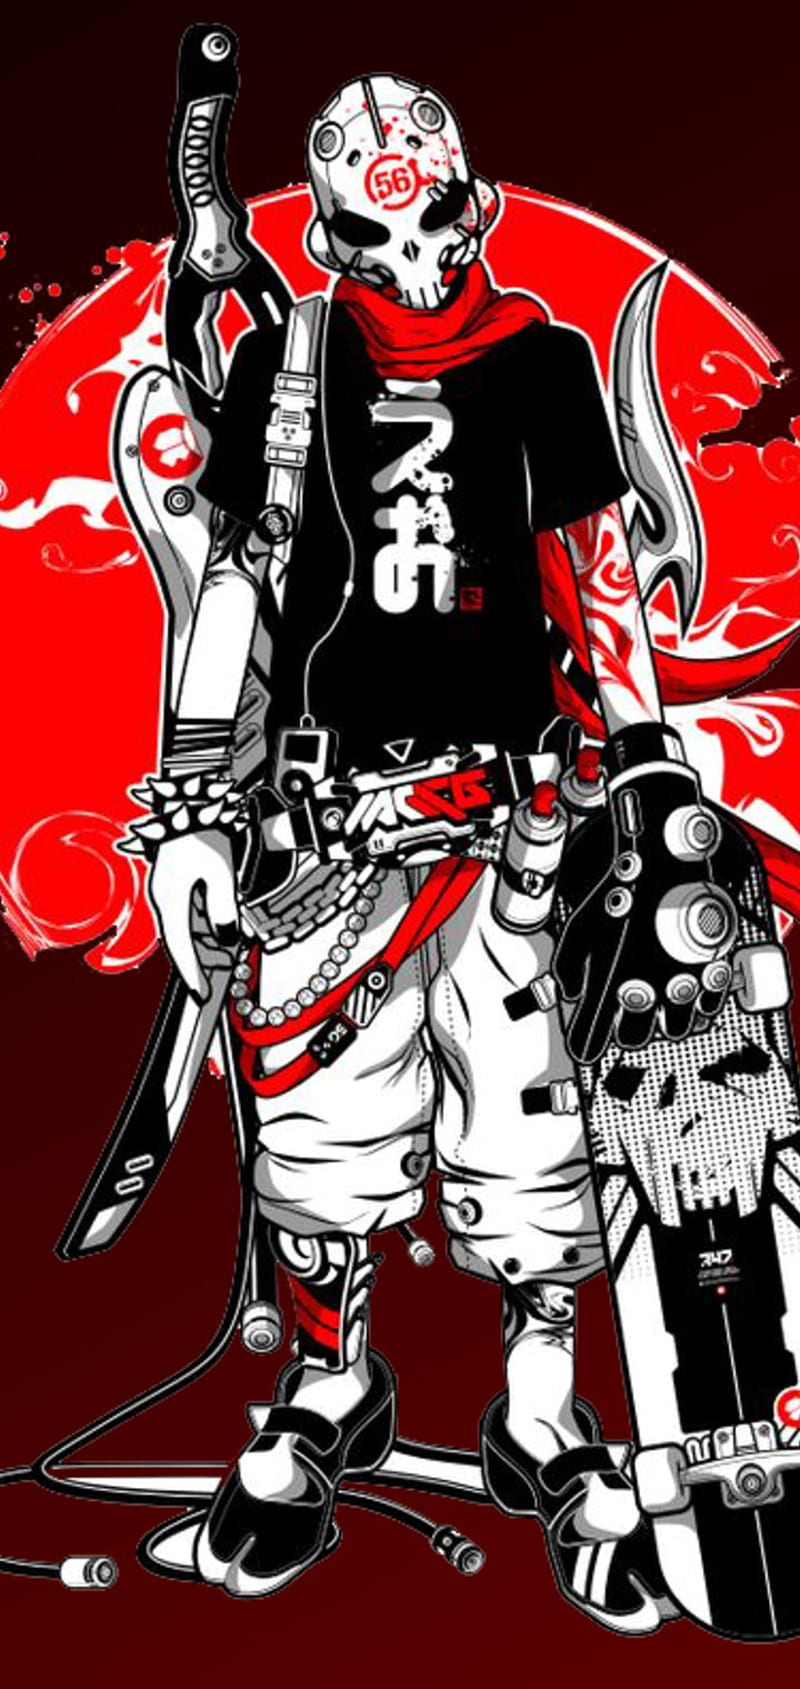 Anime Skateboard Cool Wallpapers - Wallpaper Cave